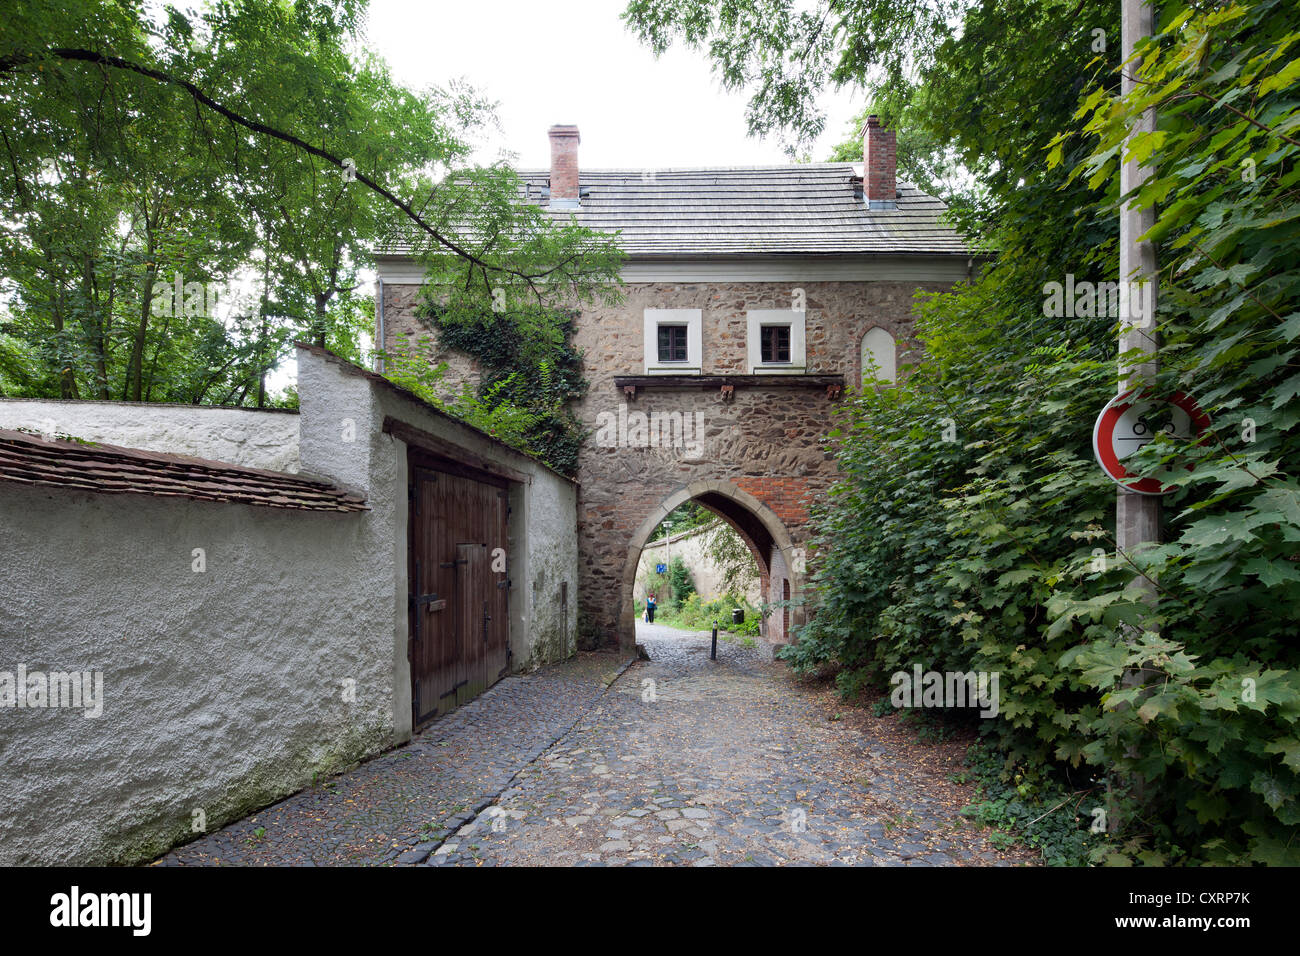 Finstertor gate, youth building works of the German Foundation for Monument Protection, Goerlitz, Upper Lusatia, Lusatia, Saxony Stock Photo